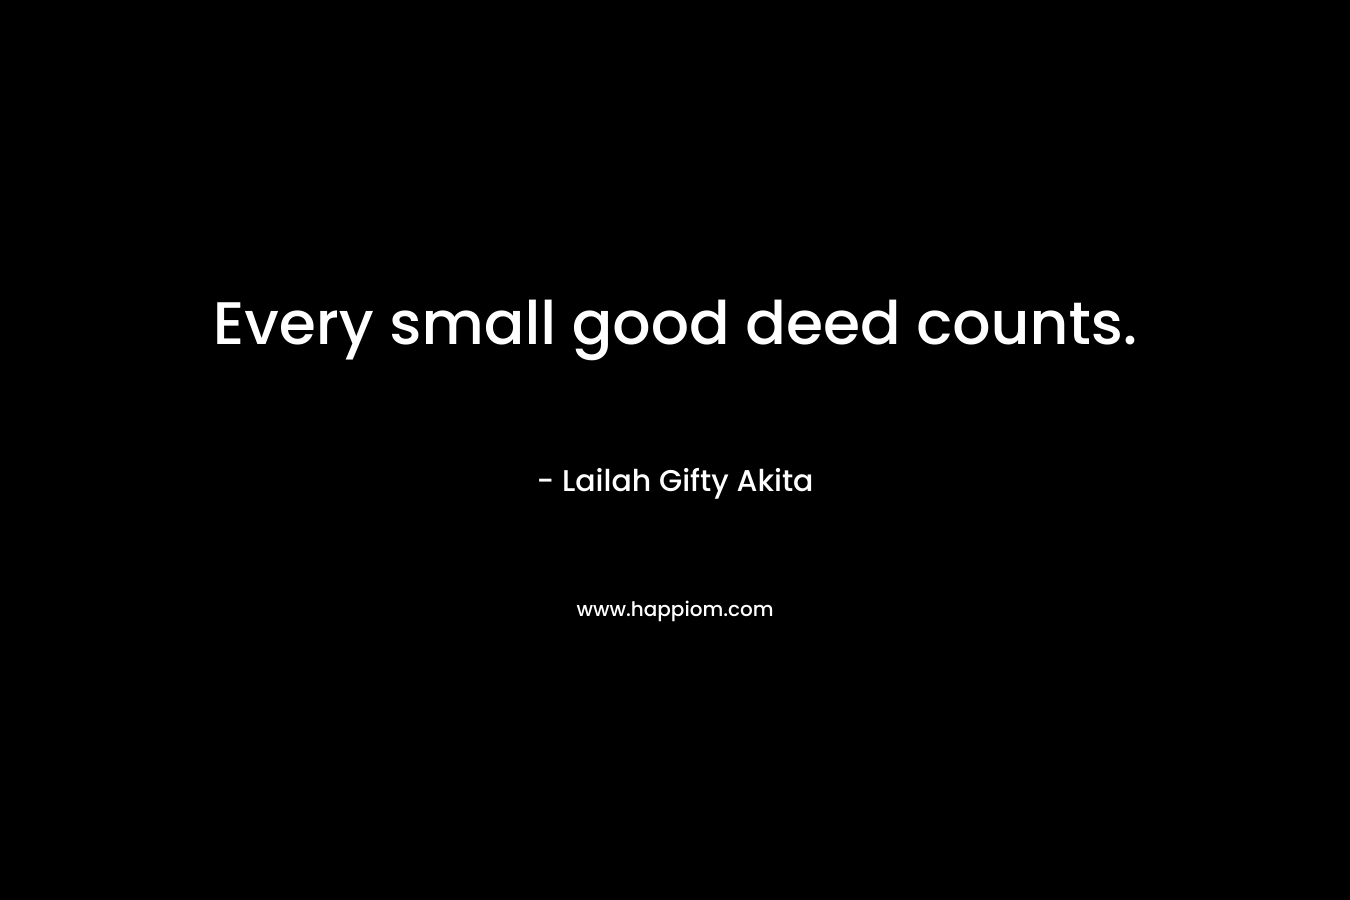 Every small good deed counts.